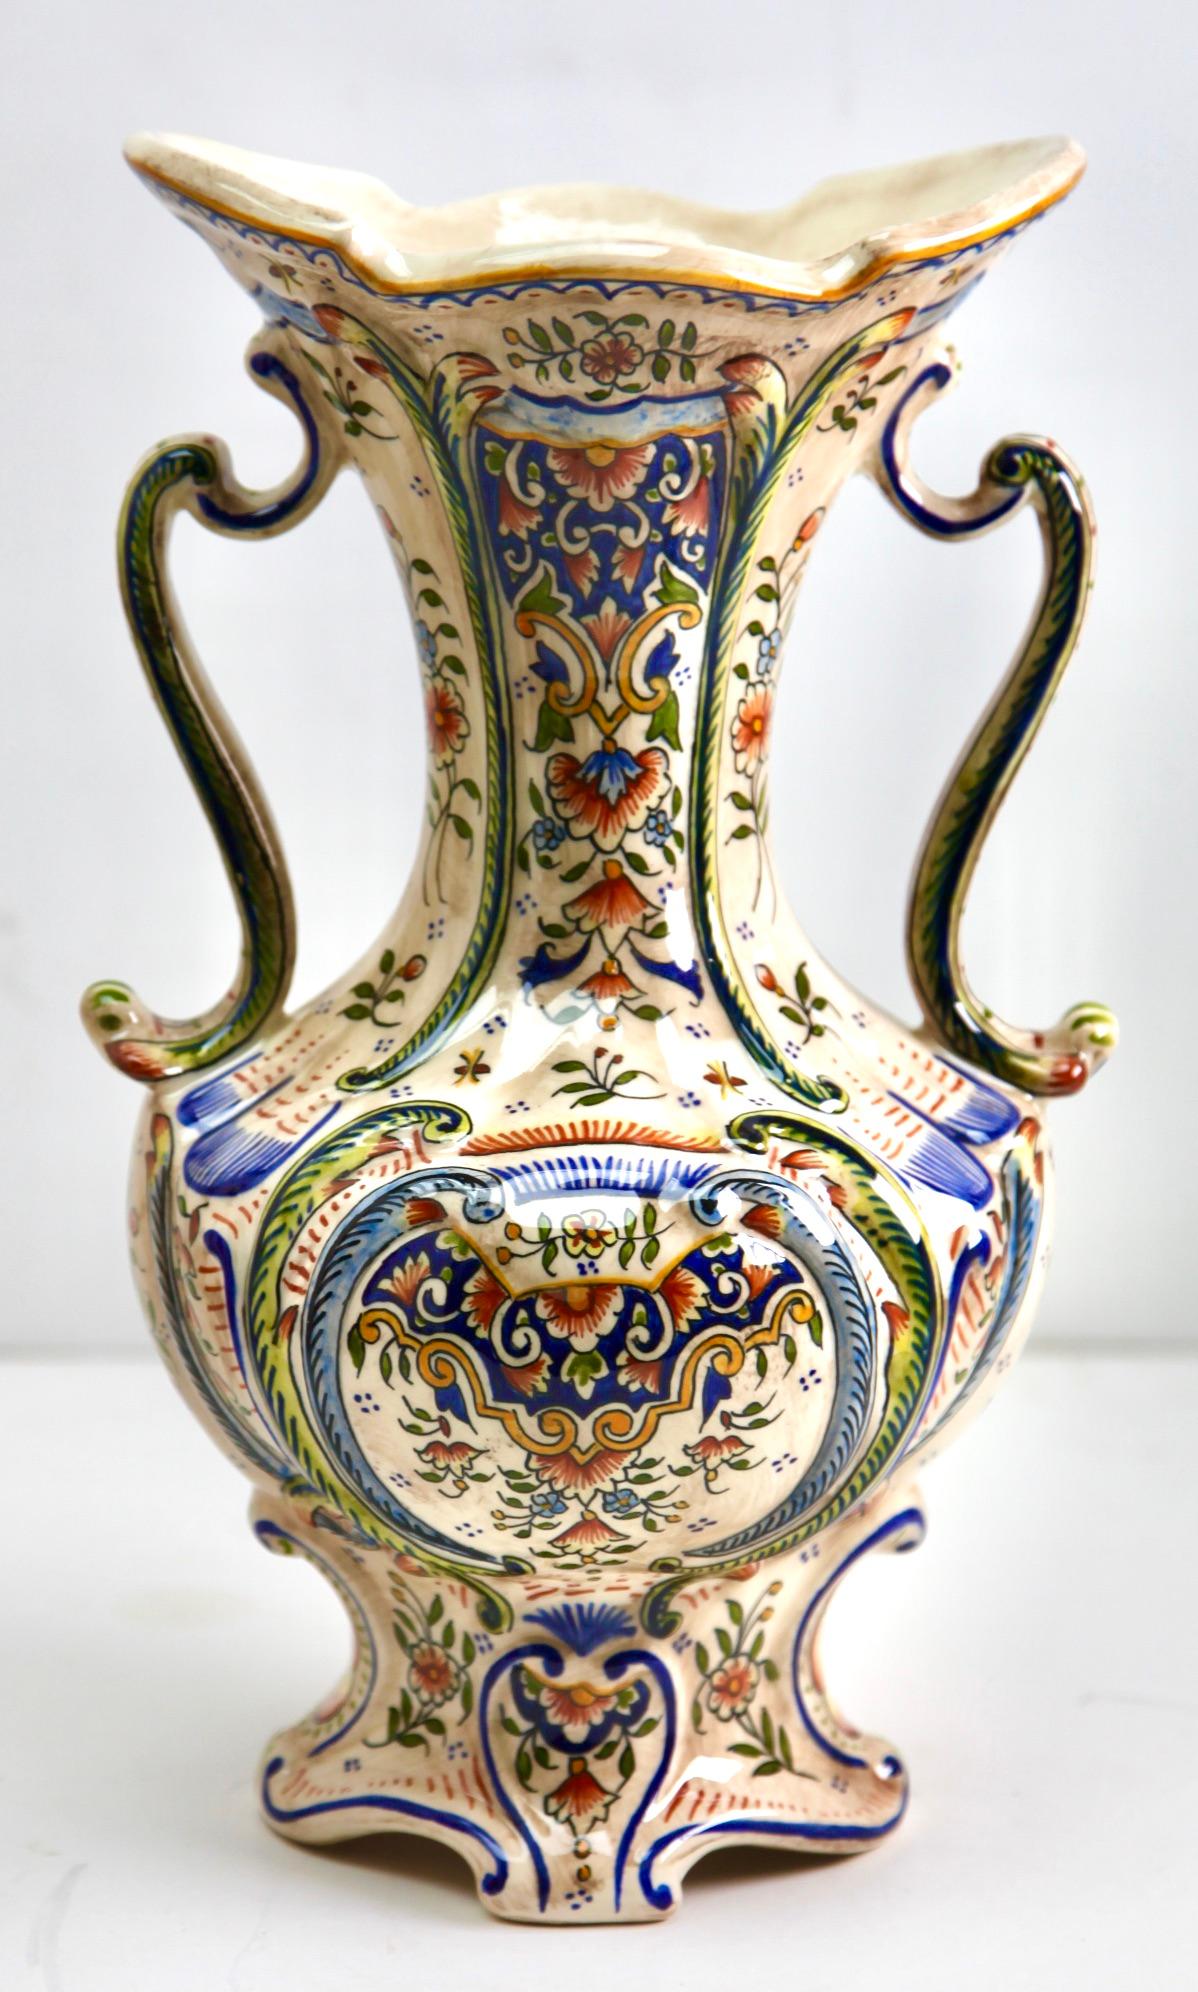 The designs on this French faience group is typical of pottery made in Rouen. 
Early 20th century French hand-painted Faience vasse from Rouen.
Marking on the bottom: 